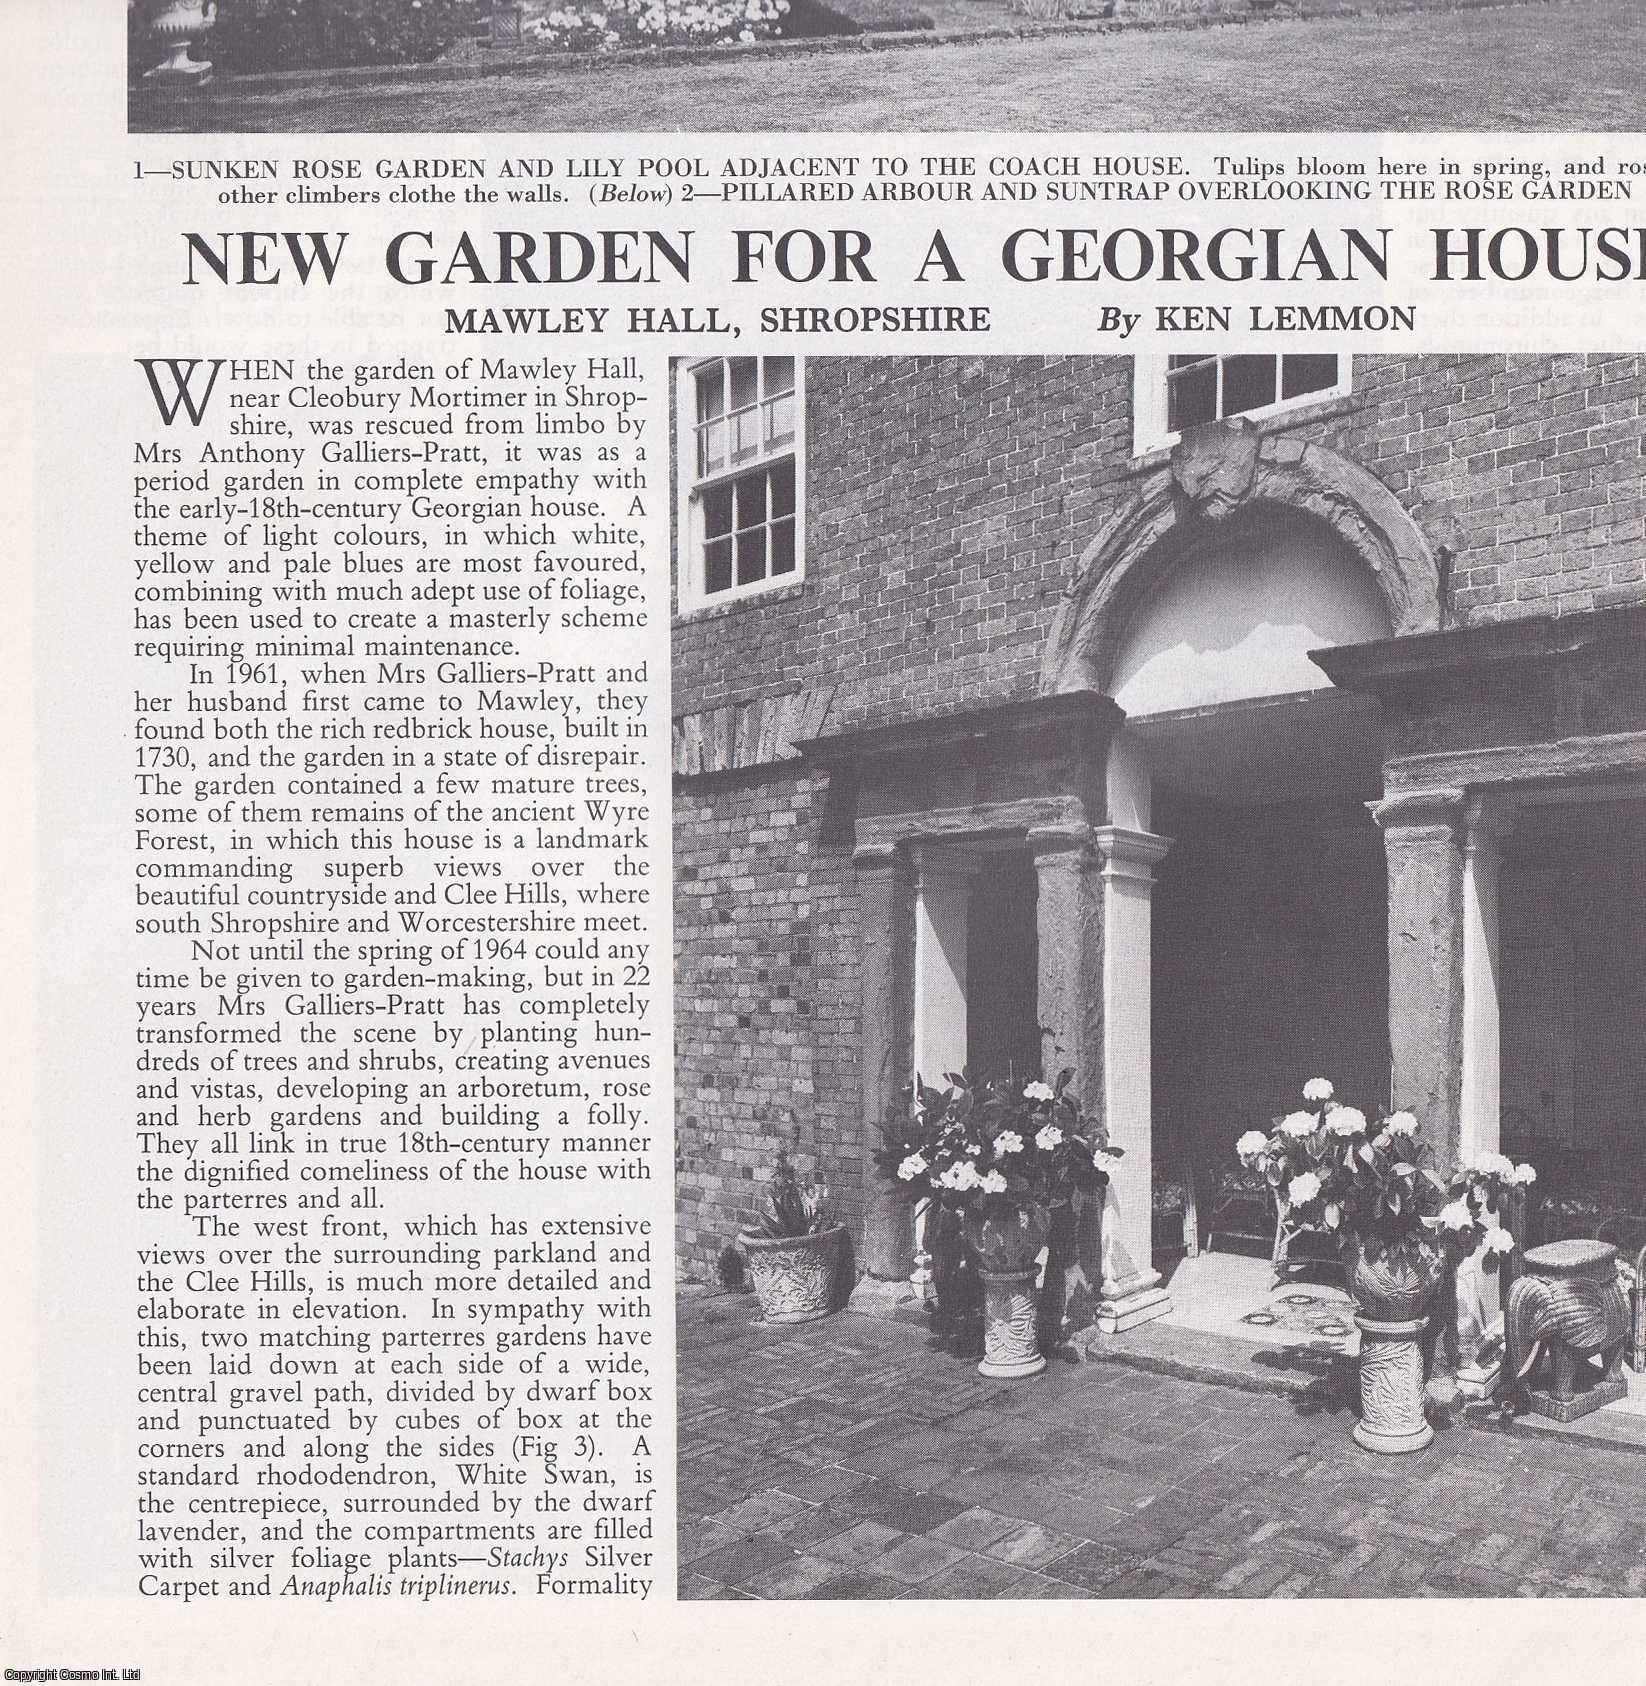 Ken Lemmon - Mawley Hall, Shropshire; New Garden for a Georgian House. Several pictures and accompanying text, removed from an original issue of Country Life Magazine, 1987.